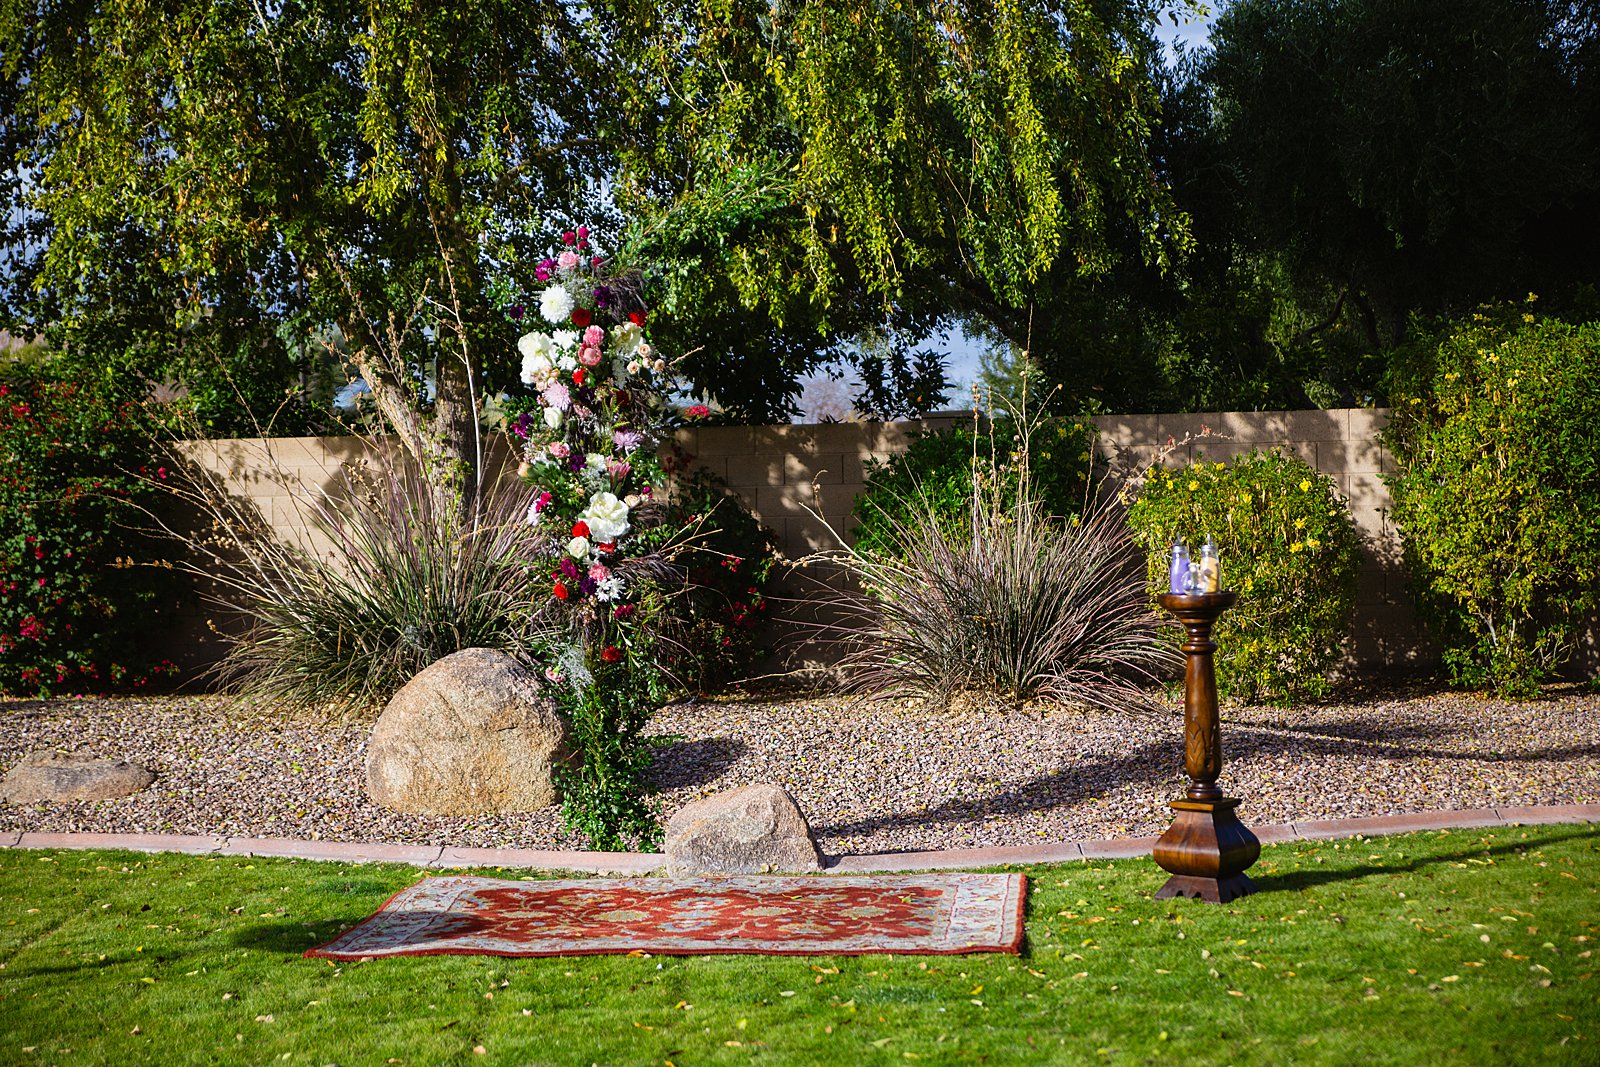 Lush and colorful floral wedding arch for a backyard wedding by Phoenix wedding photographer PMA Photography.